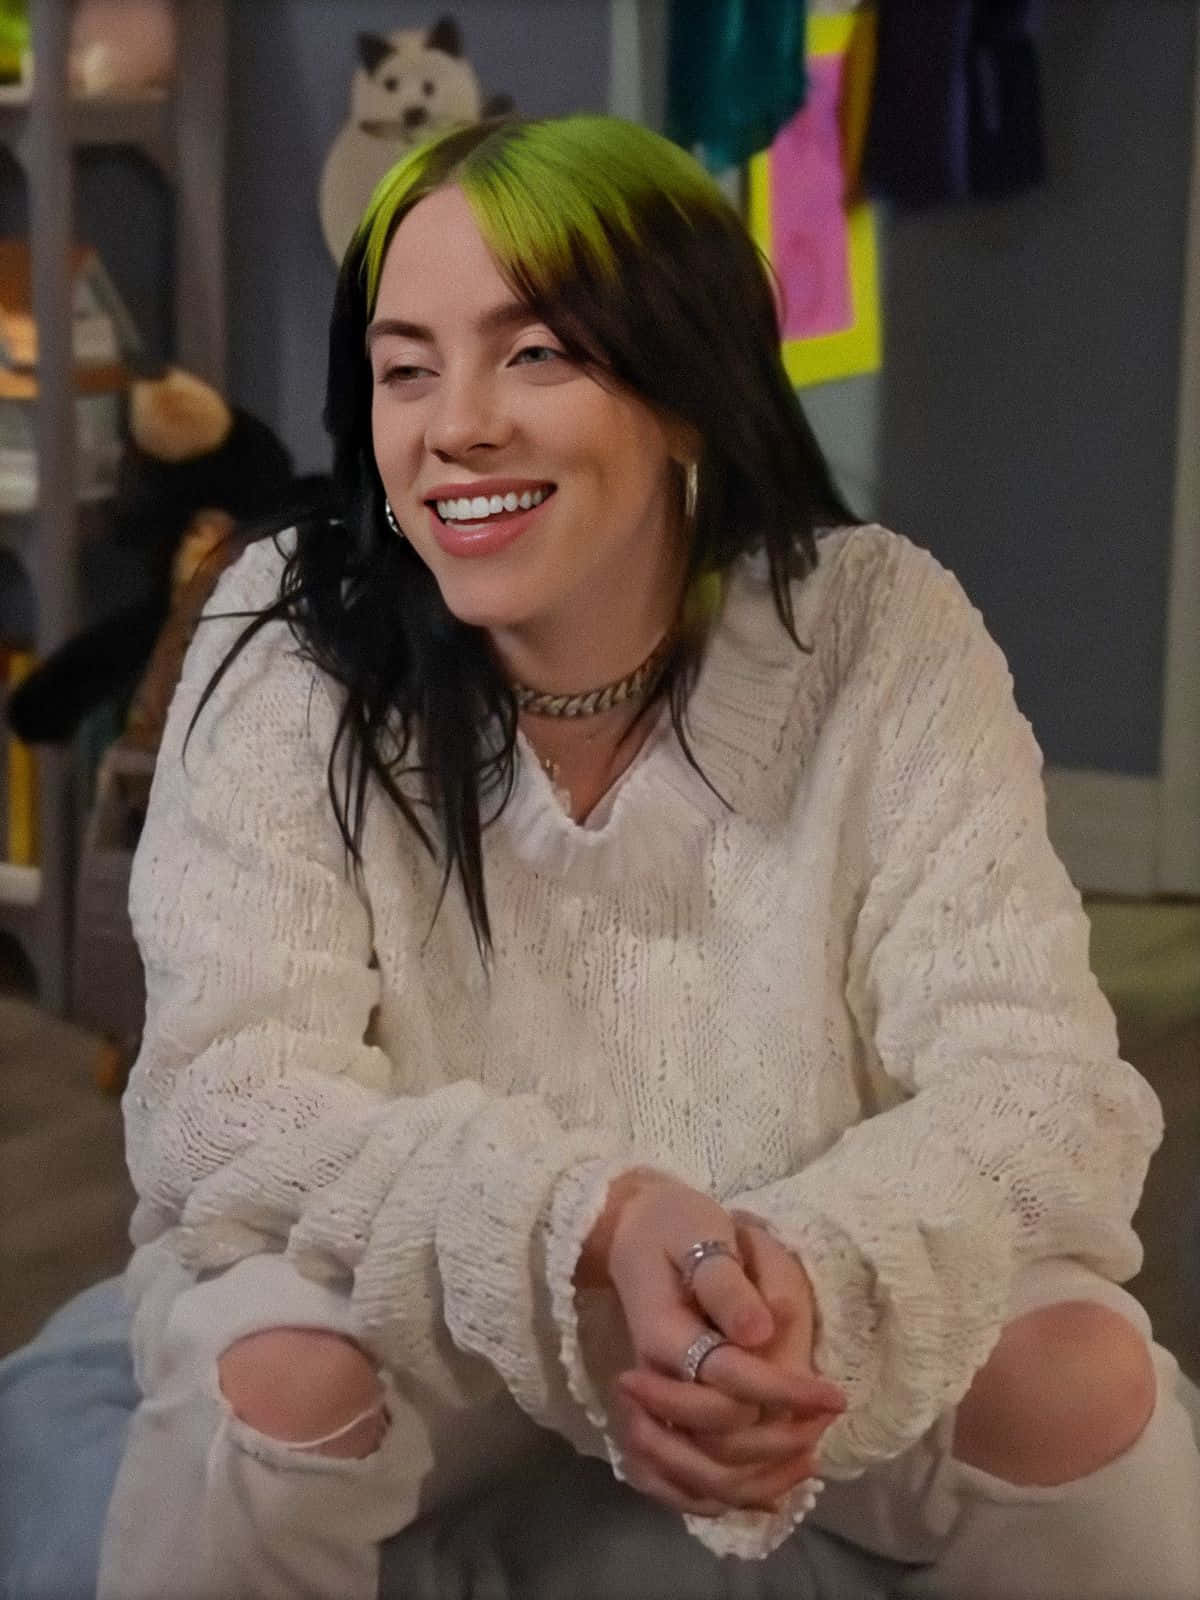 Billie Eilish wearing her signature green hoodie and smiling. Wallpaper